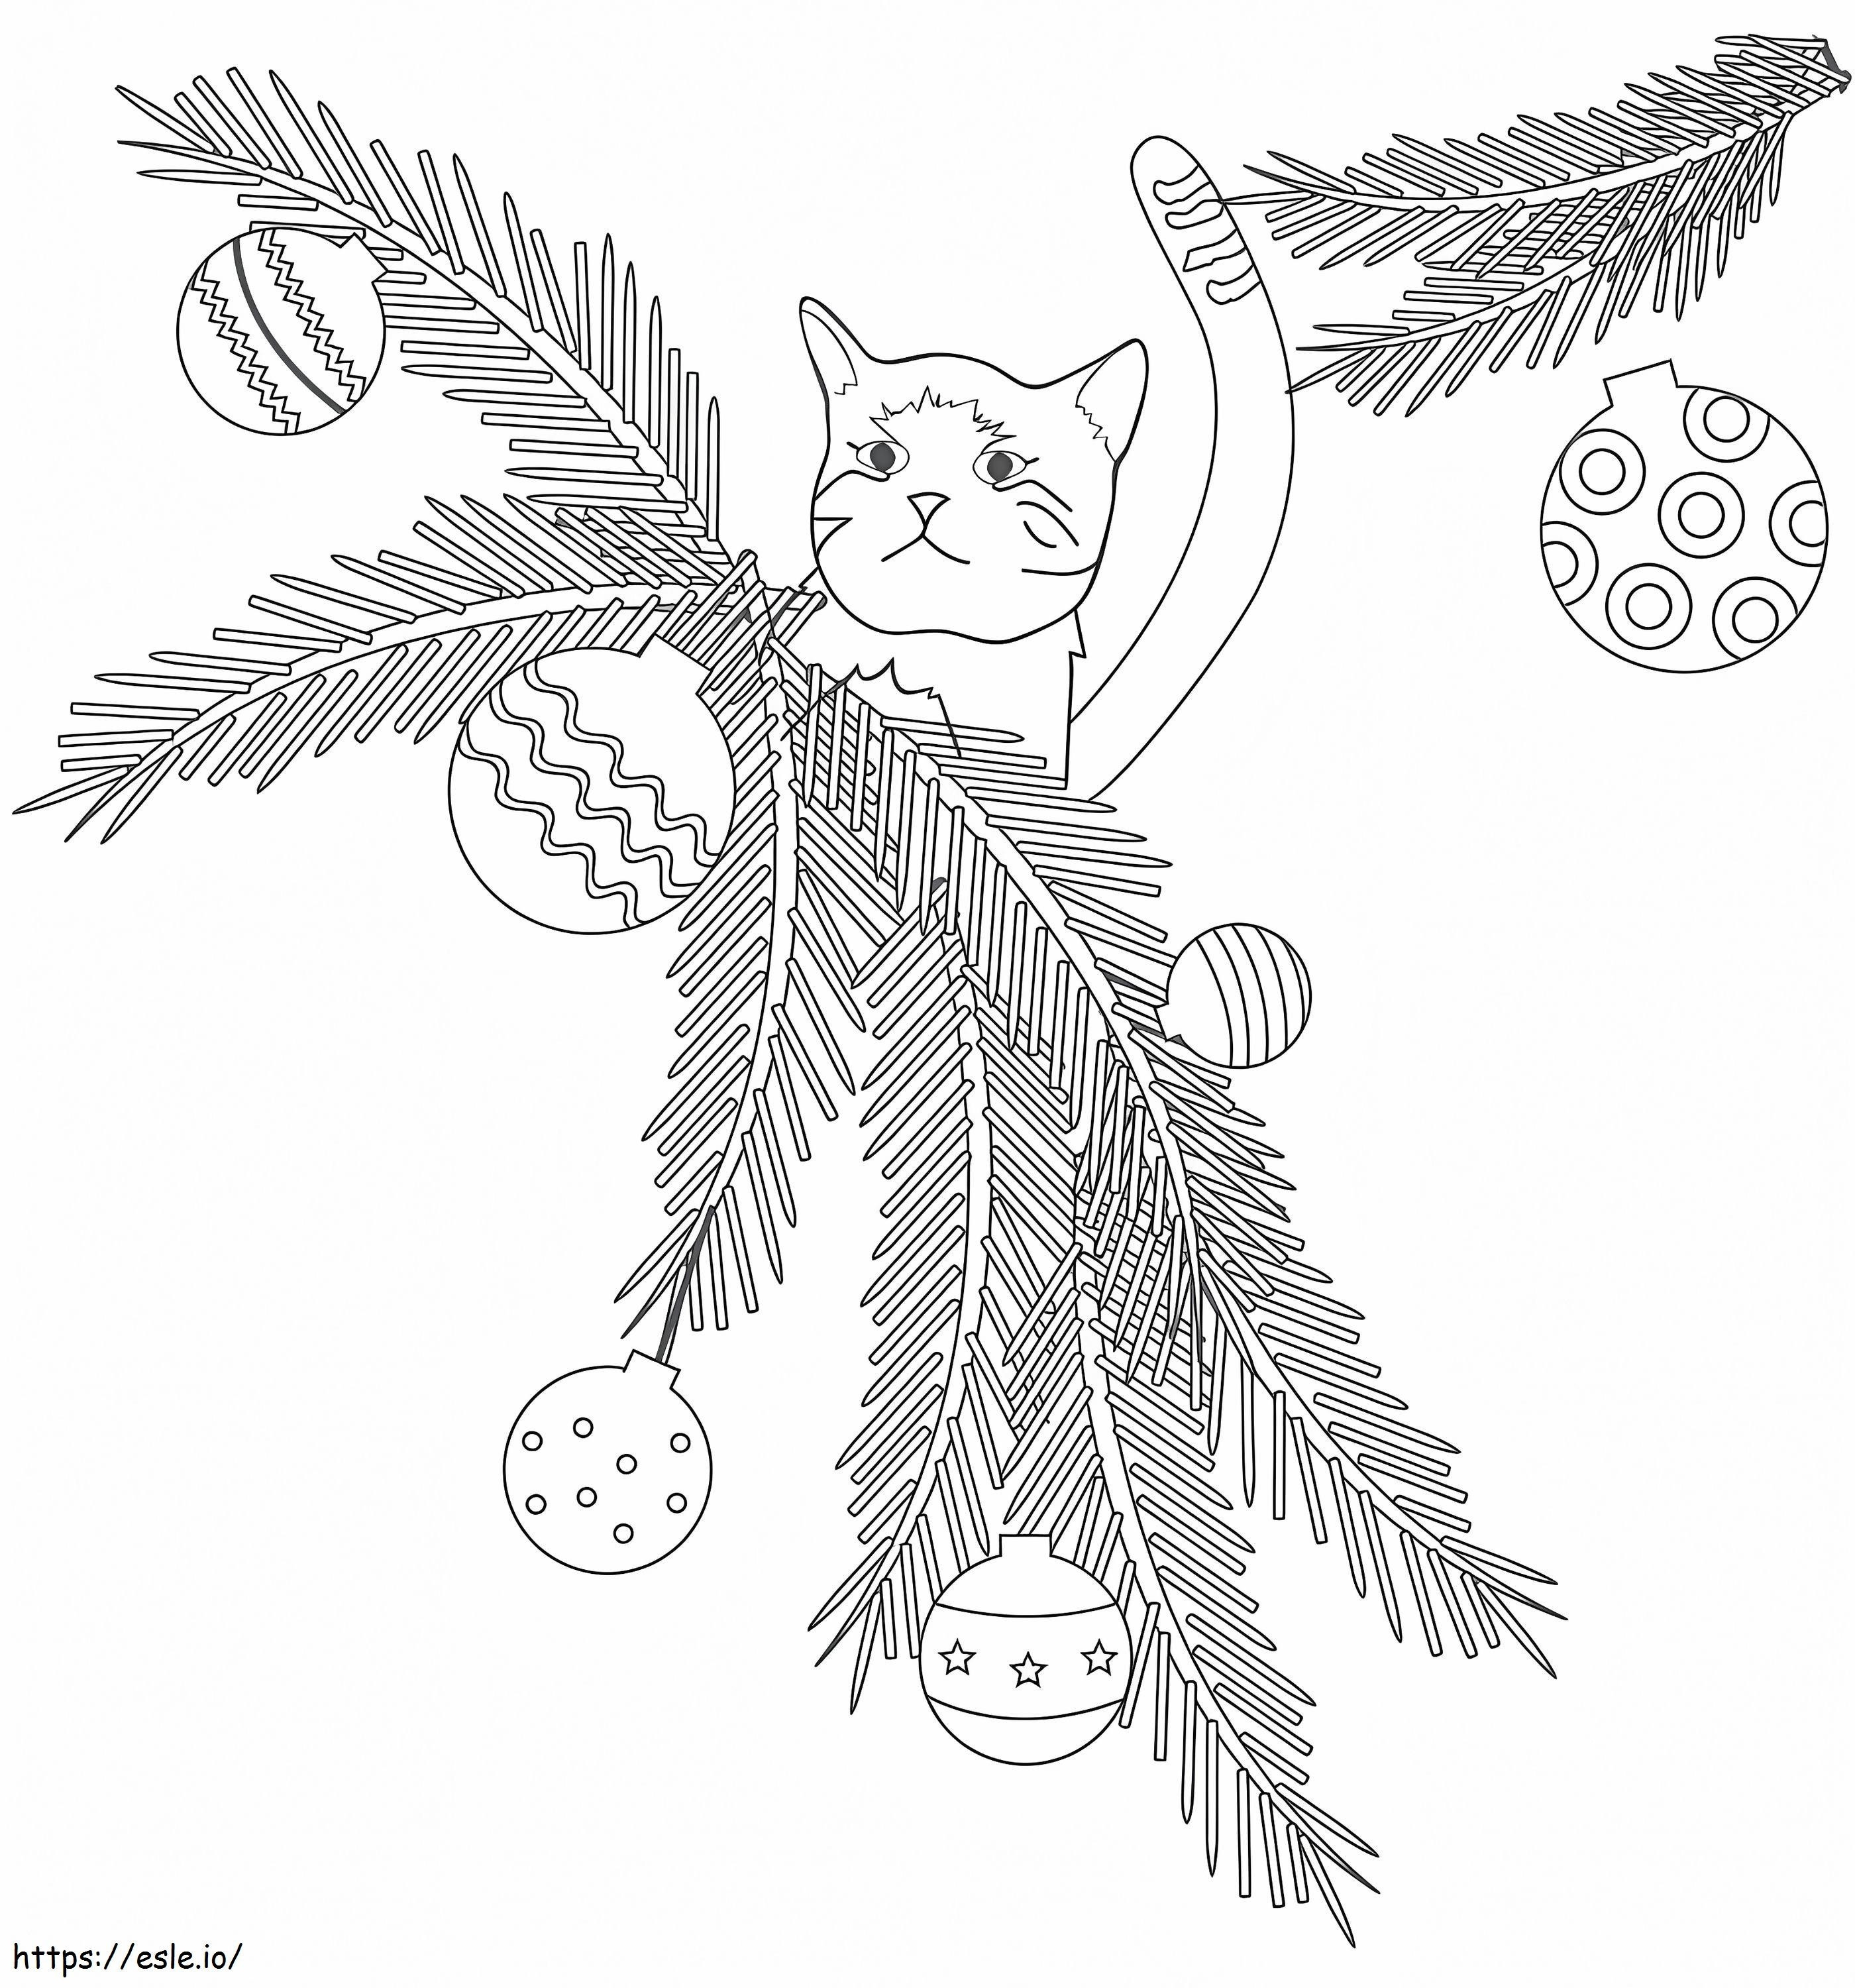 A Christmas Cat coloring page